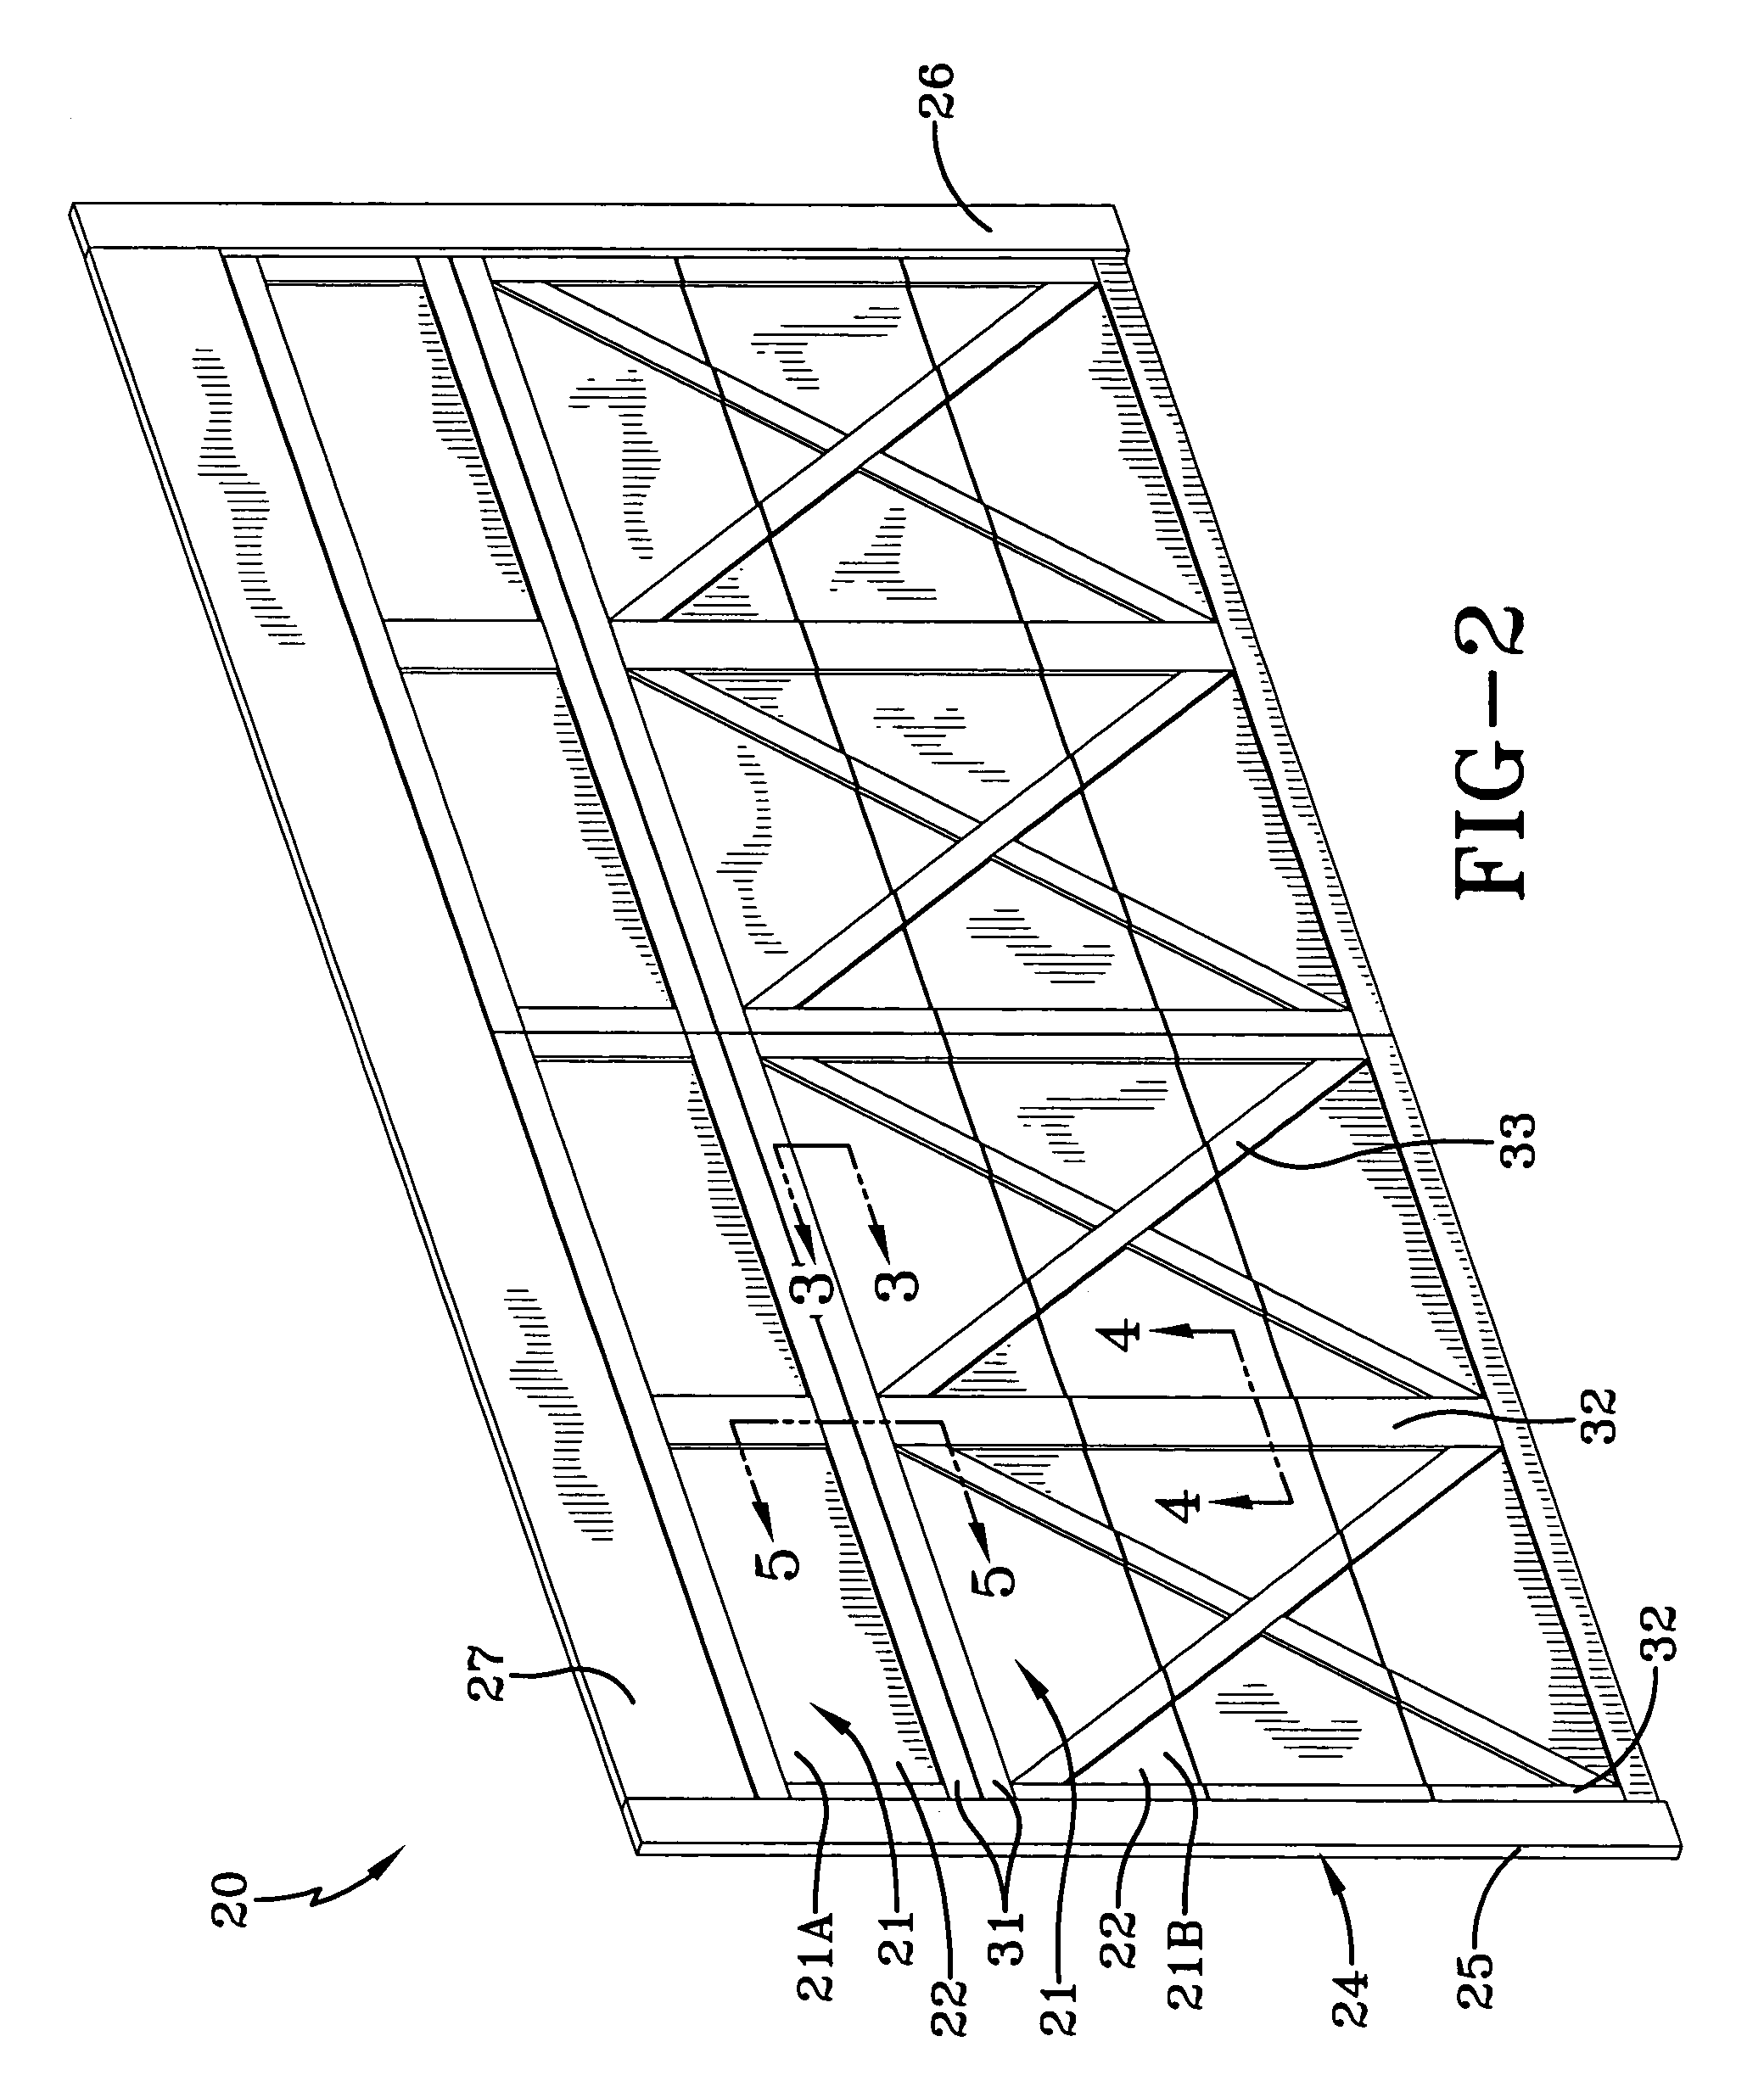 Pinch resistant sectional door with decorative components and method of attachment